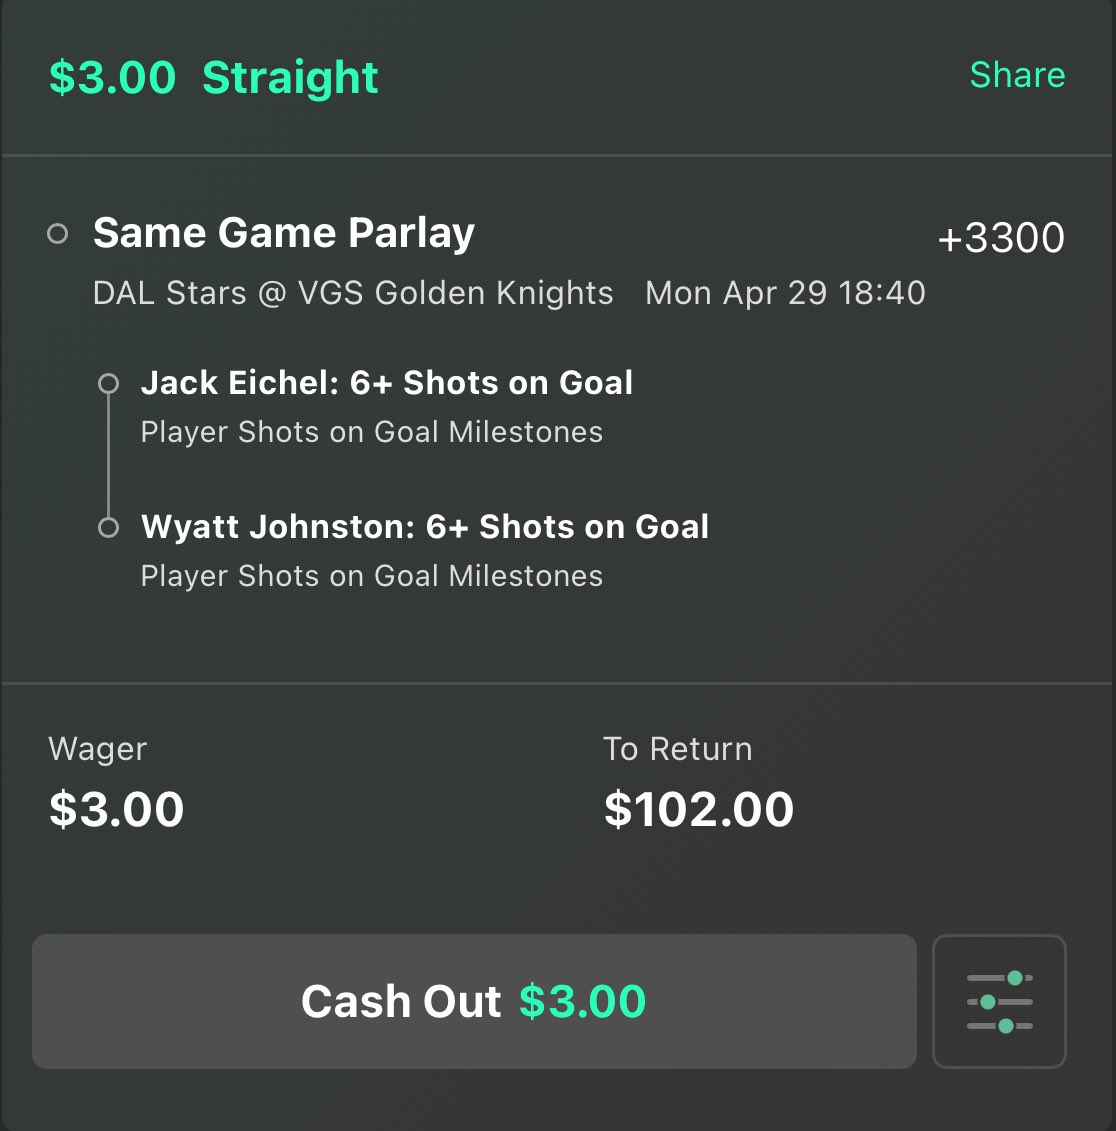 DAL⭐️ @ VGS⚔️ shot builder These guys rip puck and have been dogs all series, I don’t see it ending tonight.. expecting a close game between these two teams, meaning overtime is high possibility with both teams hungry for a win🫱🏼‍🫲🏻 Goodluck🫡 #NHL #NHLPicks